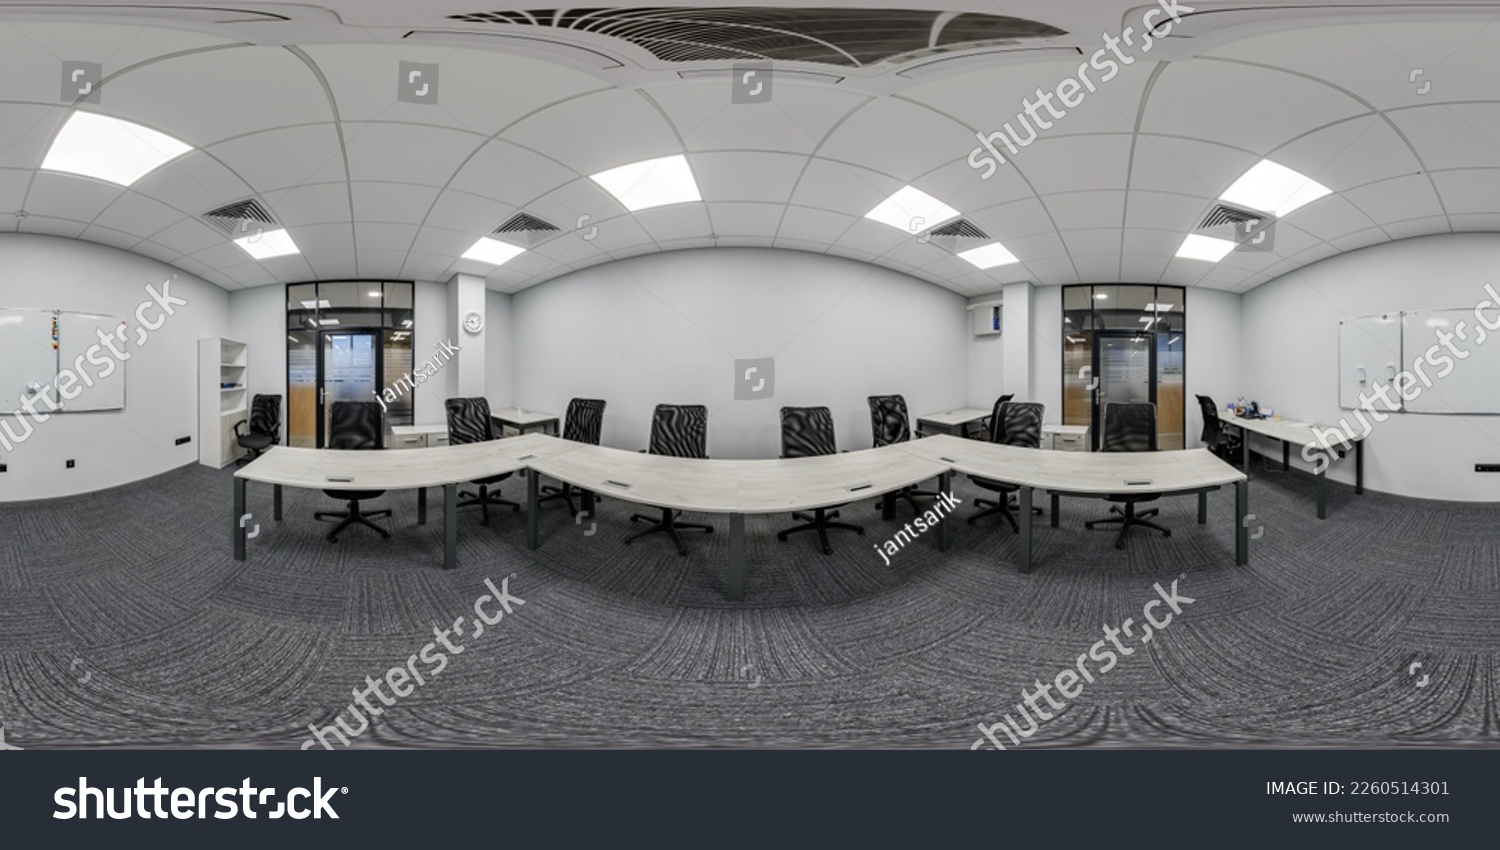 full spherical hdri seamless hdri 360 panorama in interior of empty conference hall for business meeting in equirectangular projection. AR VR content #2260514301